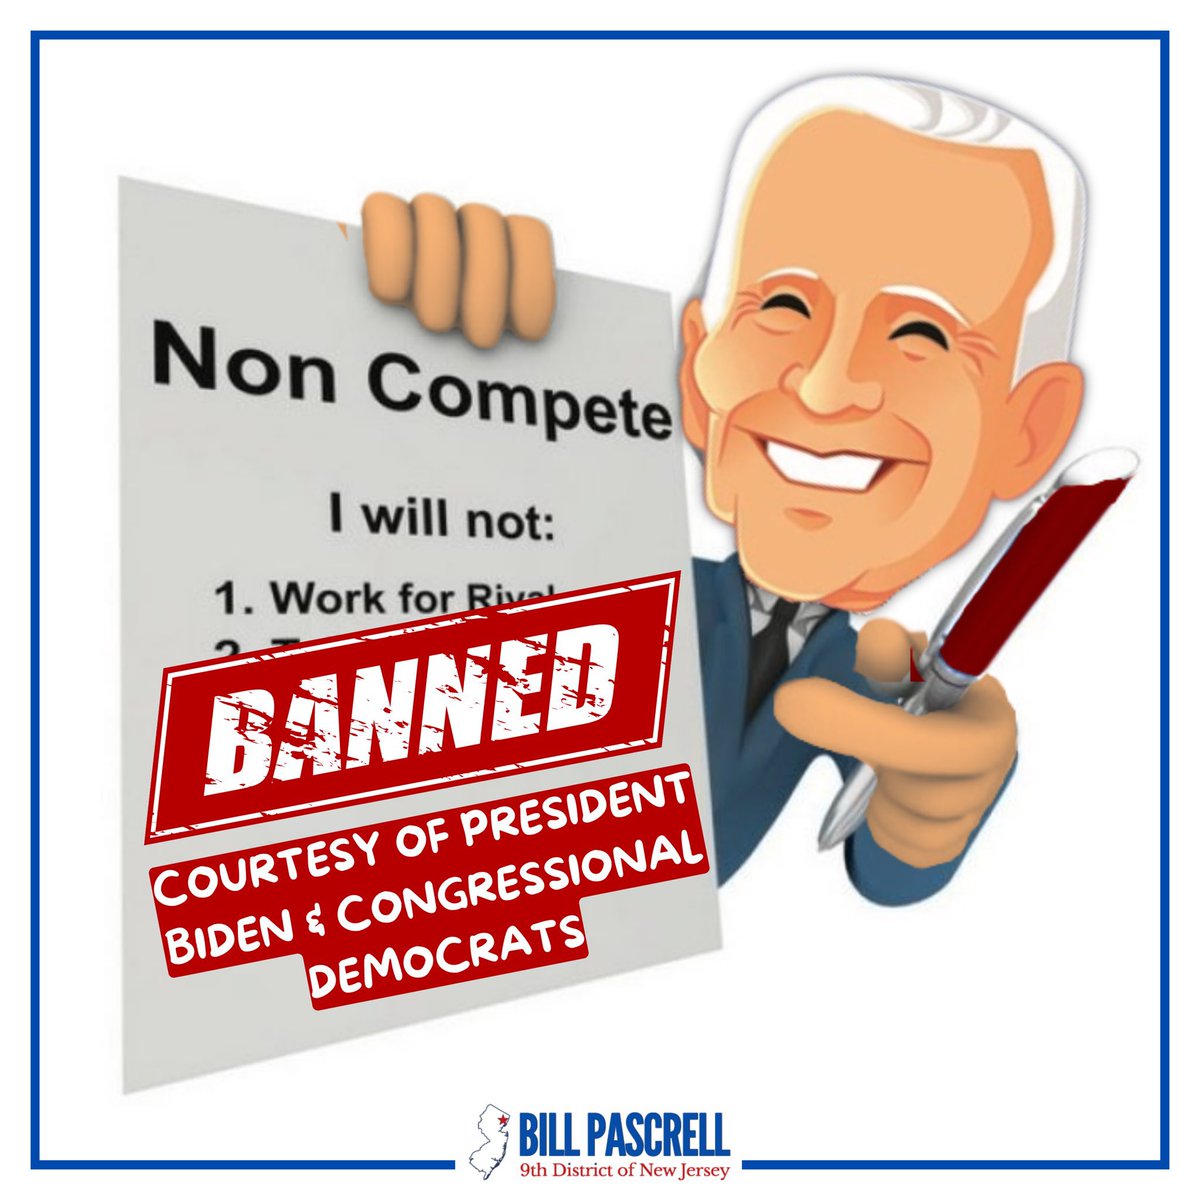 In case you missed it the Biden admin has banned noncompete contract clauses that have screwed workers for years. It’s another massive victory for working Americans